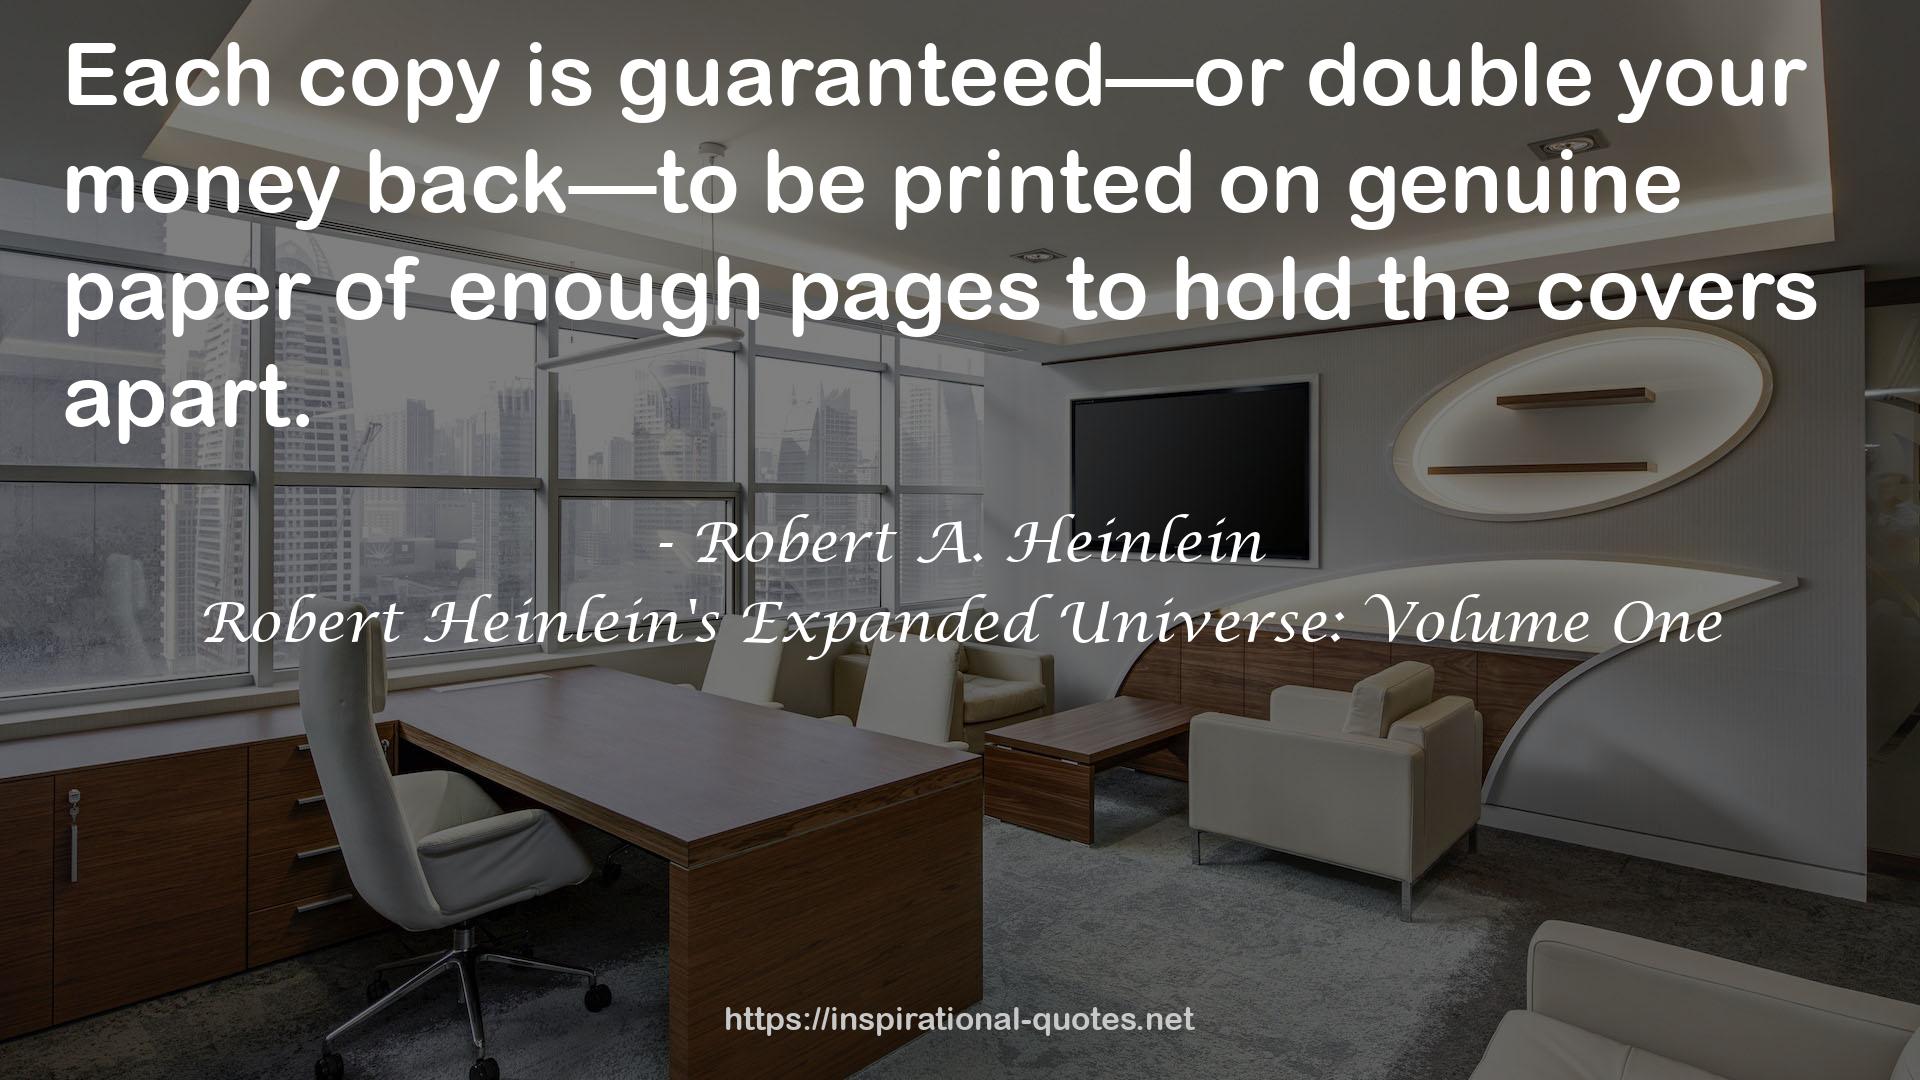 Robert Heinlein's Expanded Universe: Volume One QUOTES